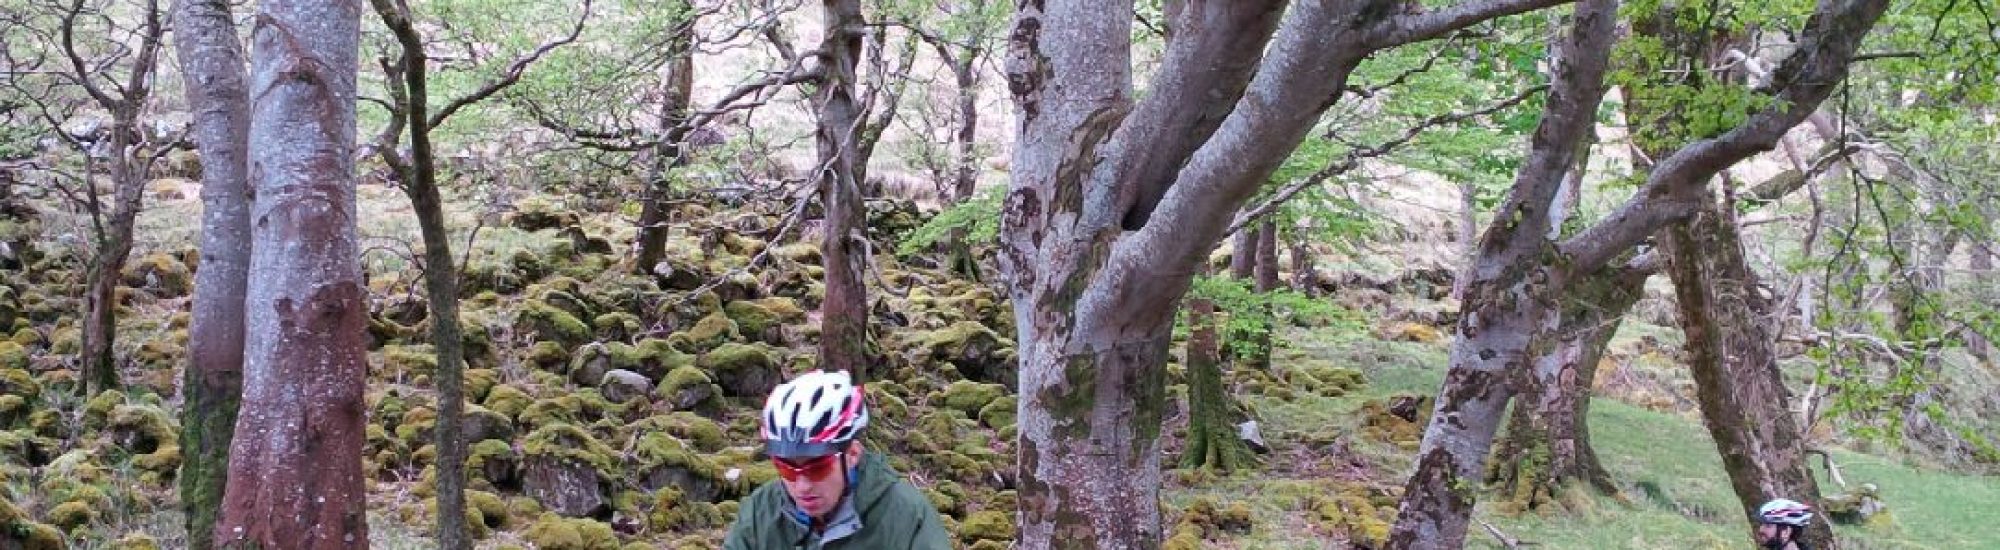 Cycling Holiday, Donegal, Ireland,